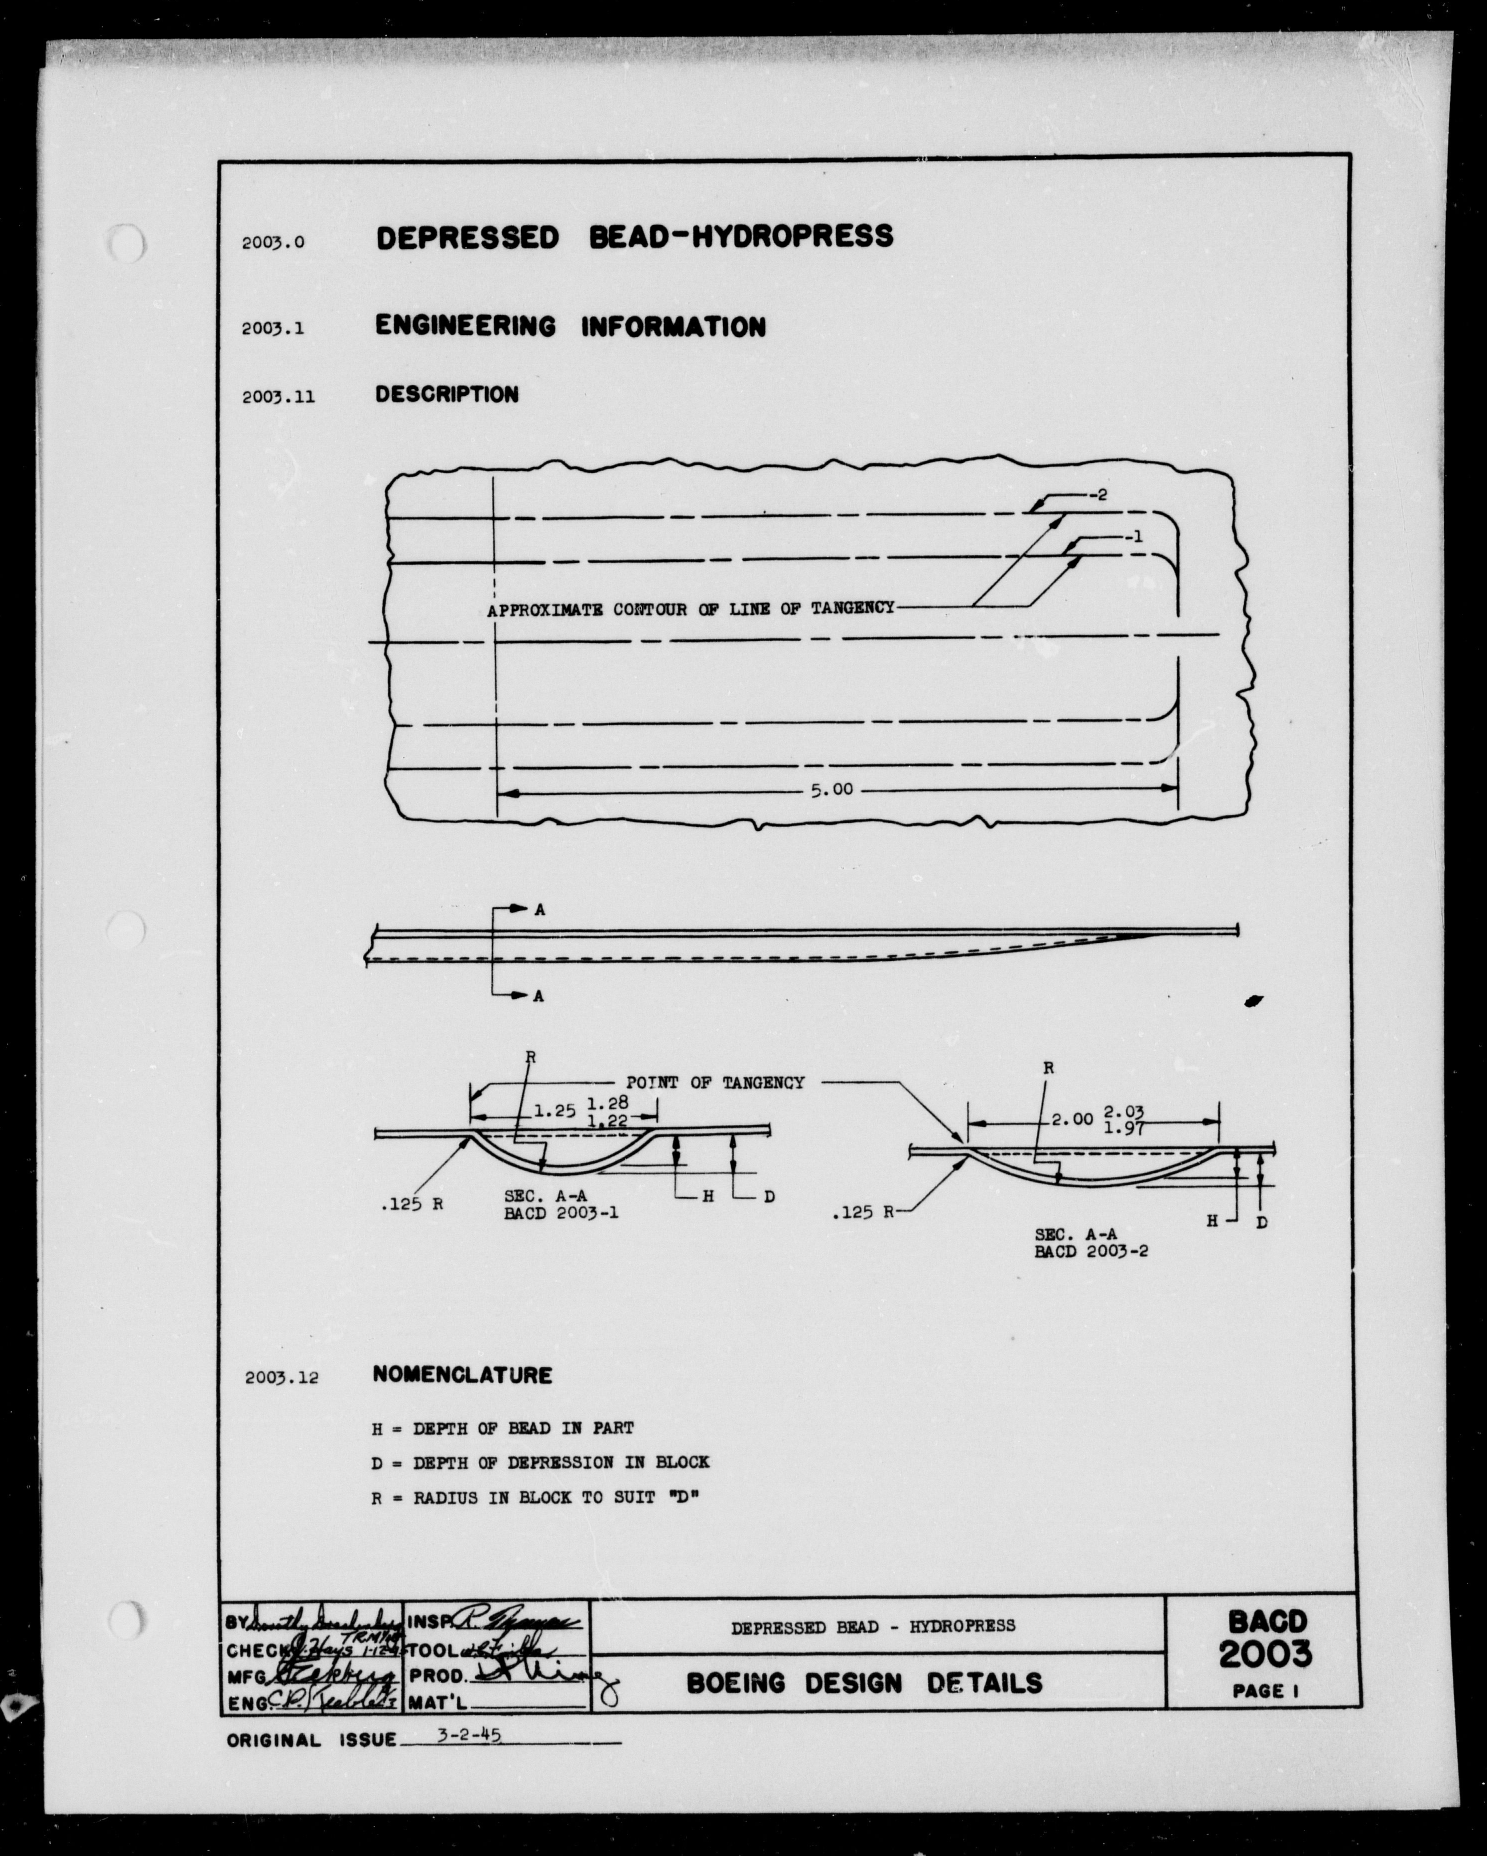 Sample page 1 from AirCorps Library document: Depressed Bead - Hydropress